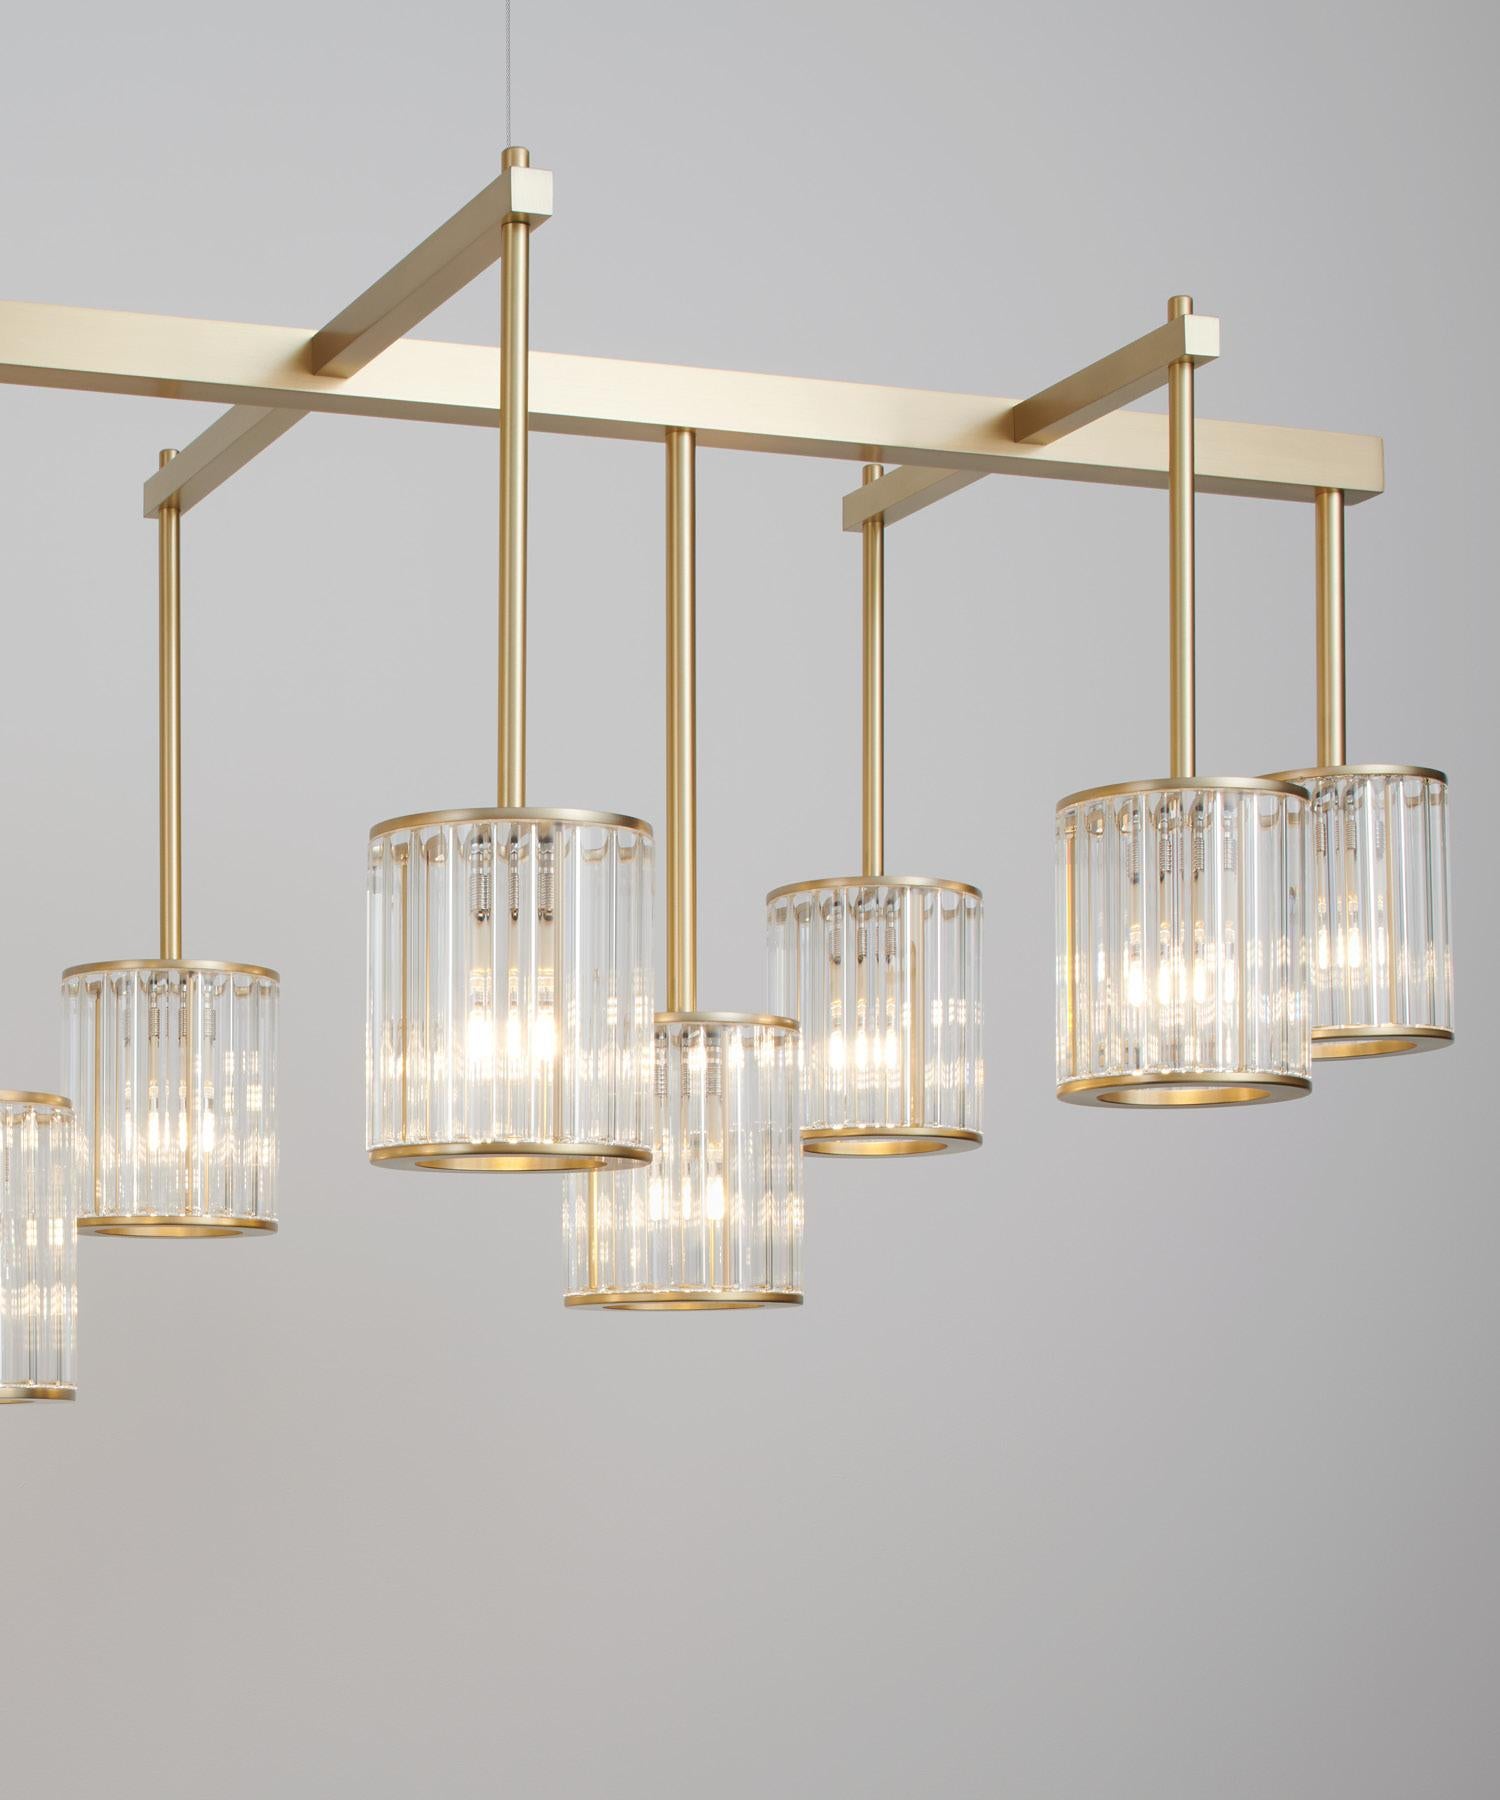 Flute Beam Chandelier with 16 Arms in Brushed Brass and Clear Glass Diffusers In New Condition For Sale In London, GB